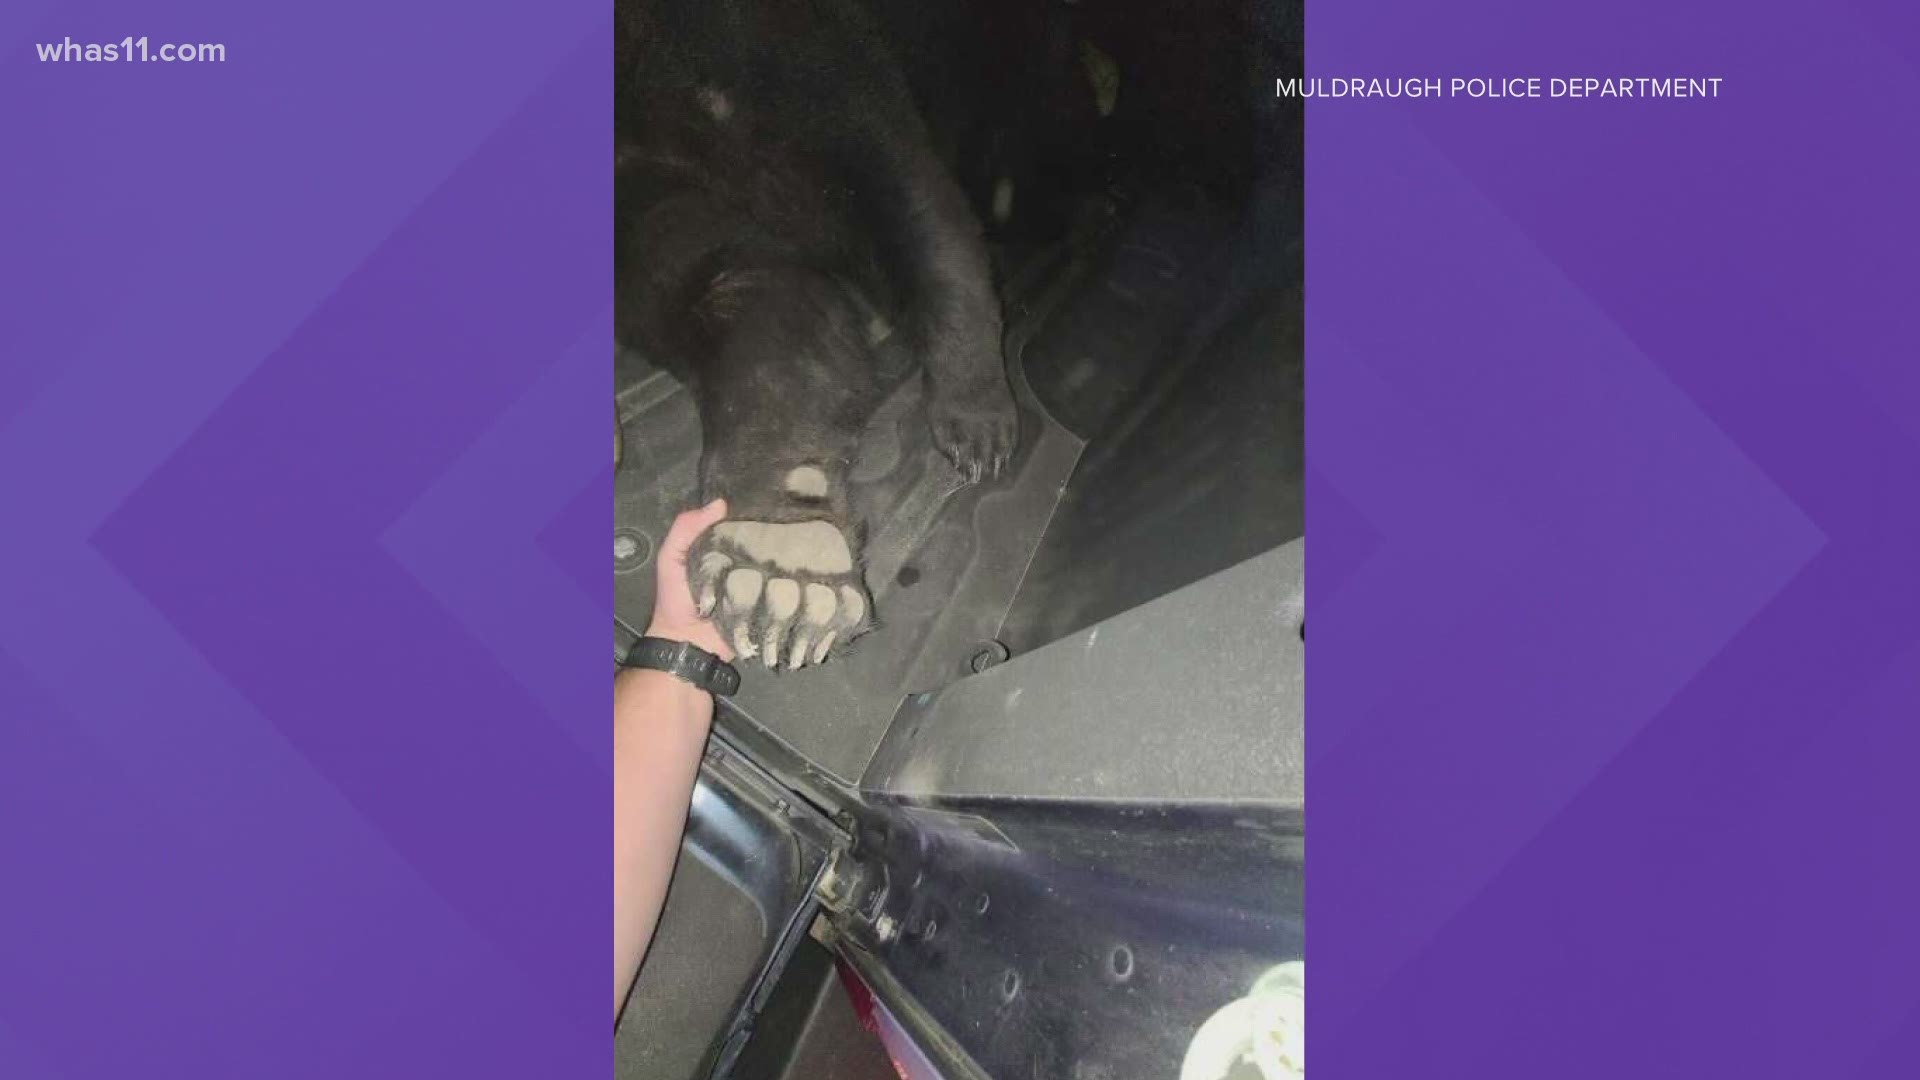 Muldraugh officials said Kentucky Fish & Wildlife took possession of the bear Thursday morning.